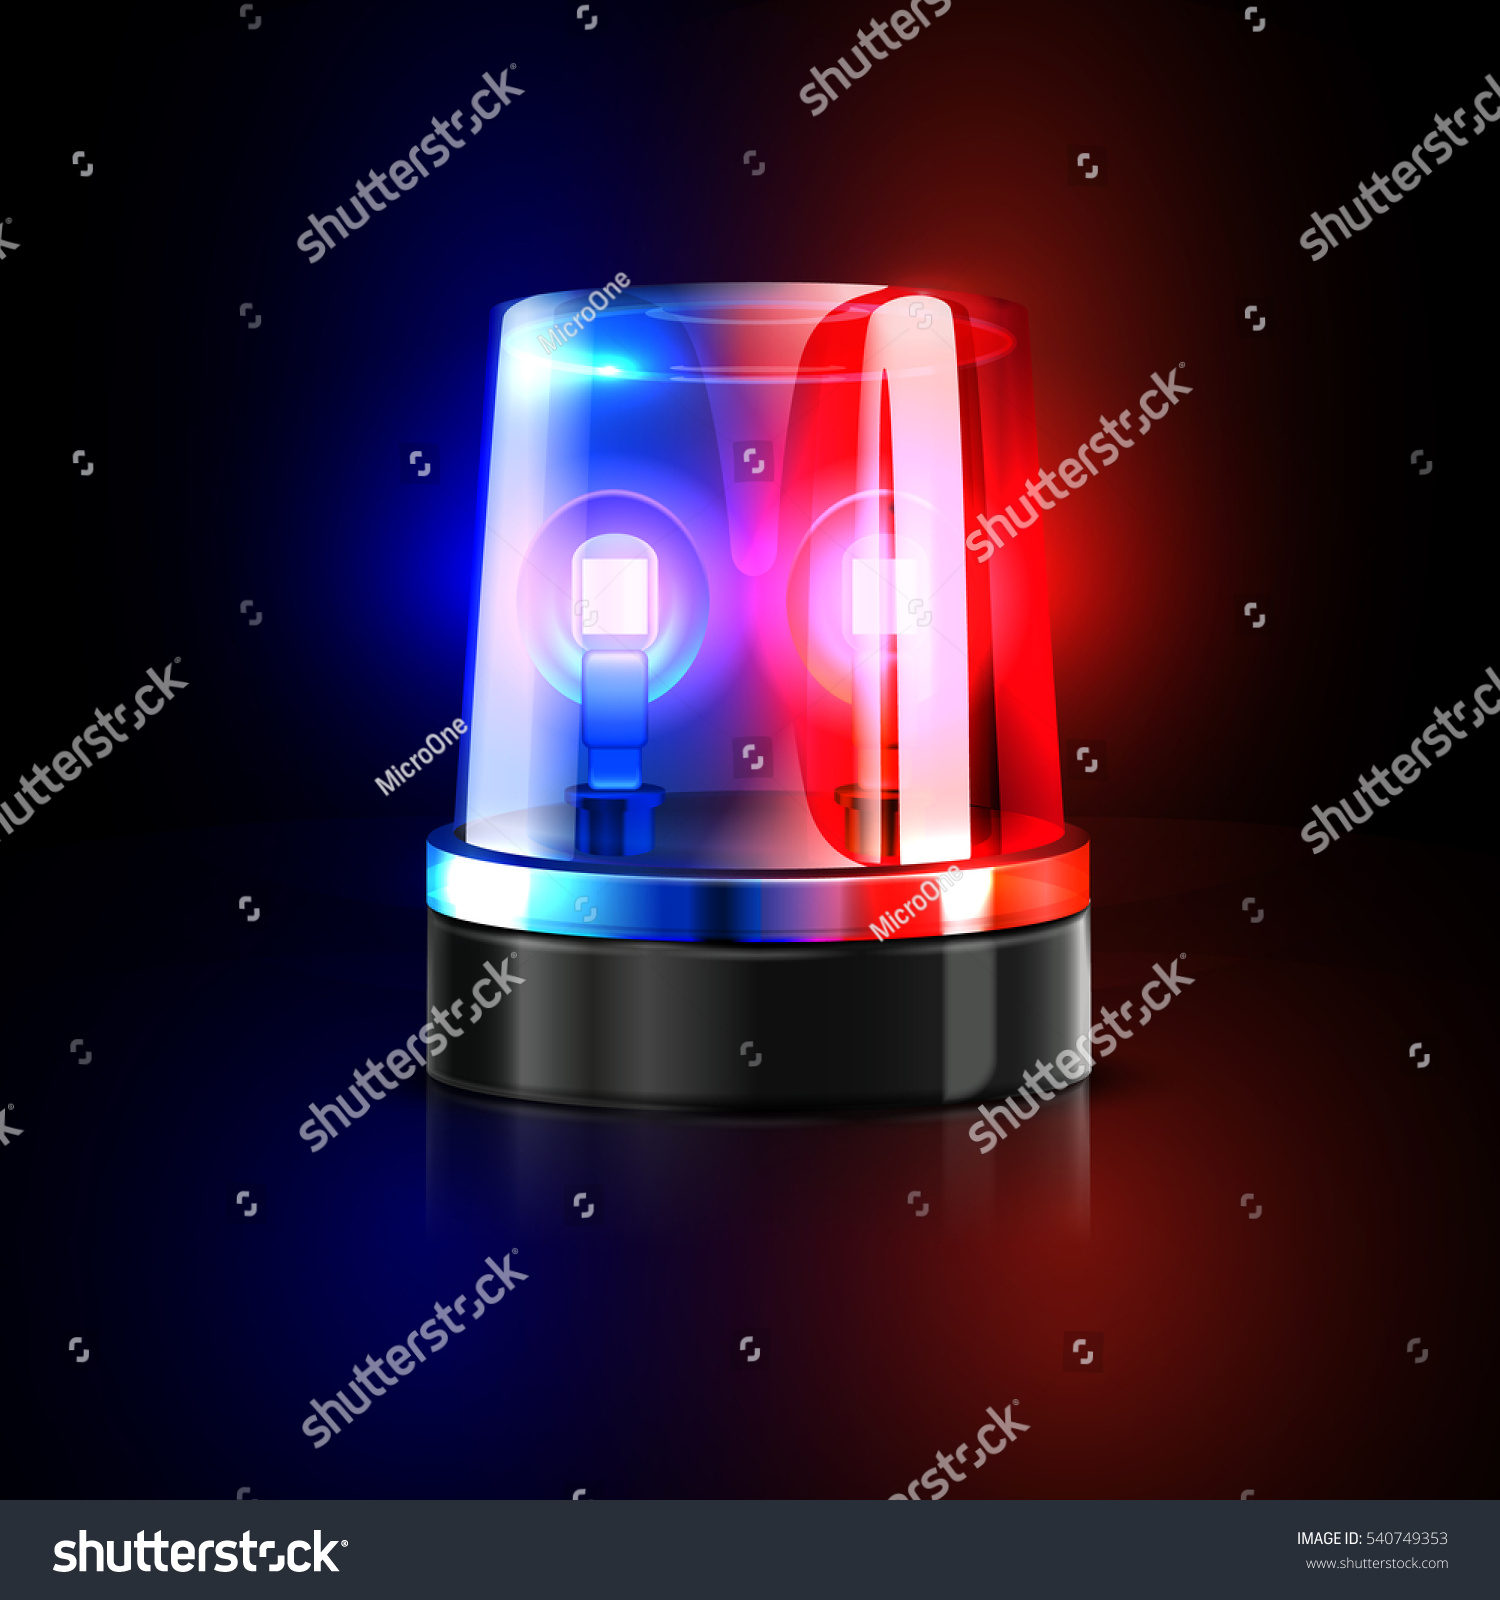 SVG of Emergency flashing police siren vector illustration. Police signal flasher isolated on black background. svg